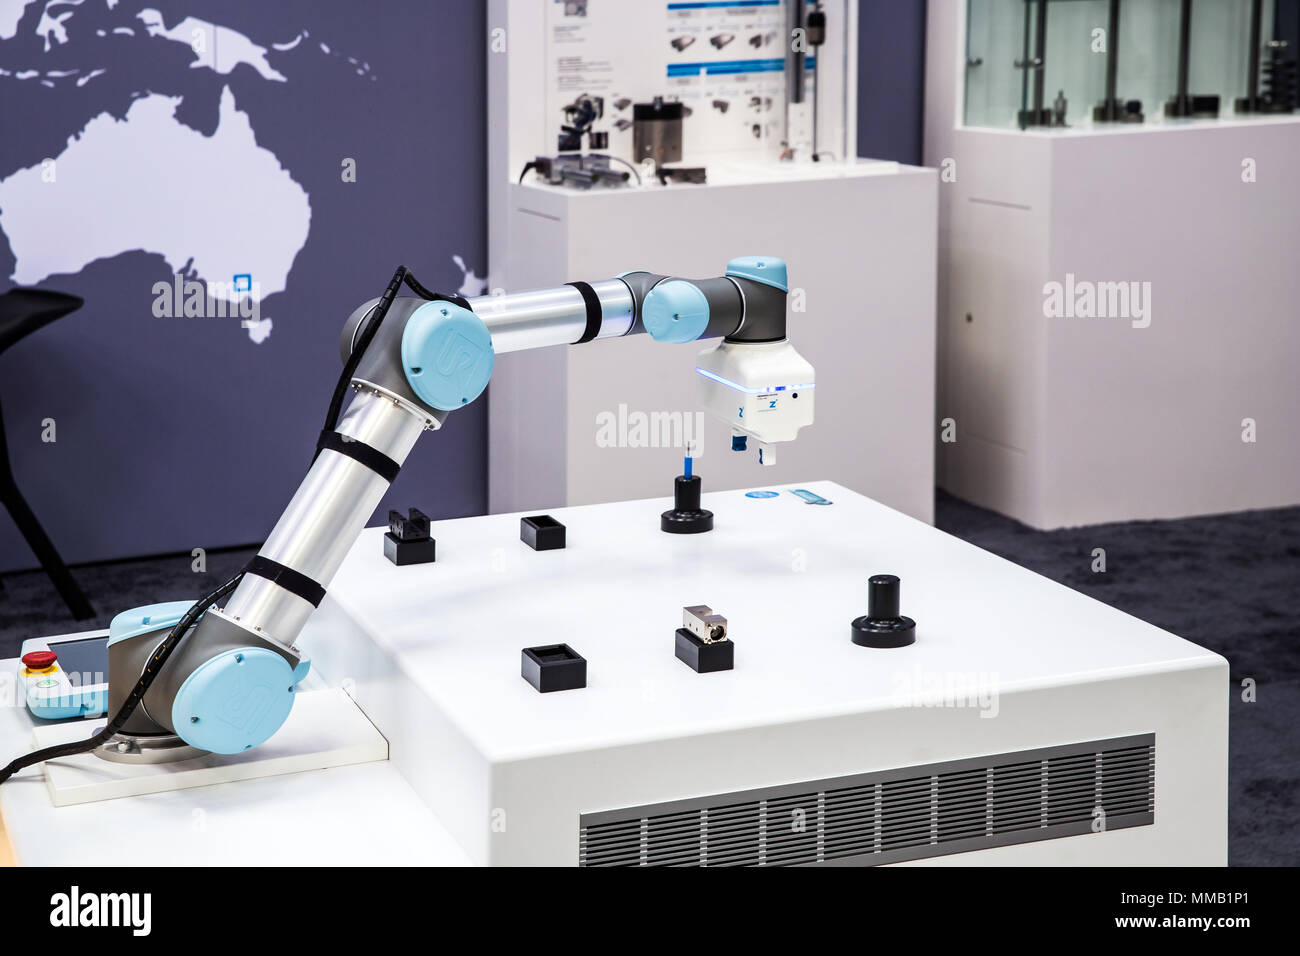 Hannover, Germany - April, 2018: Universal Robots presenting examples show how flexible and individual UR robots can be used for every requirement and Stock Photo